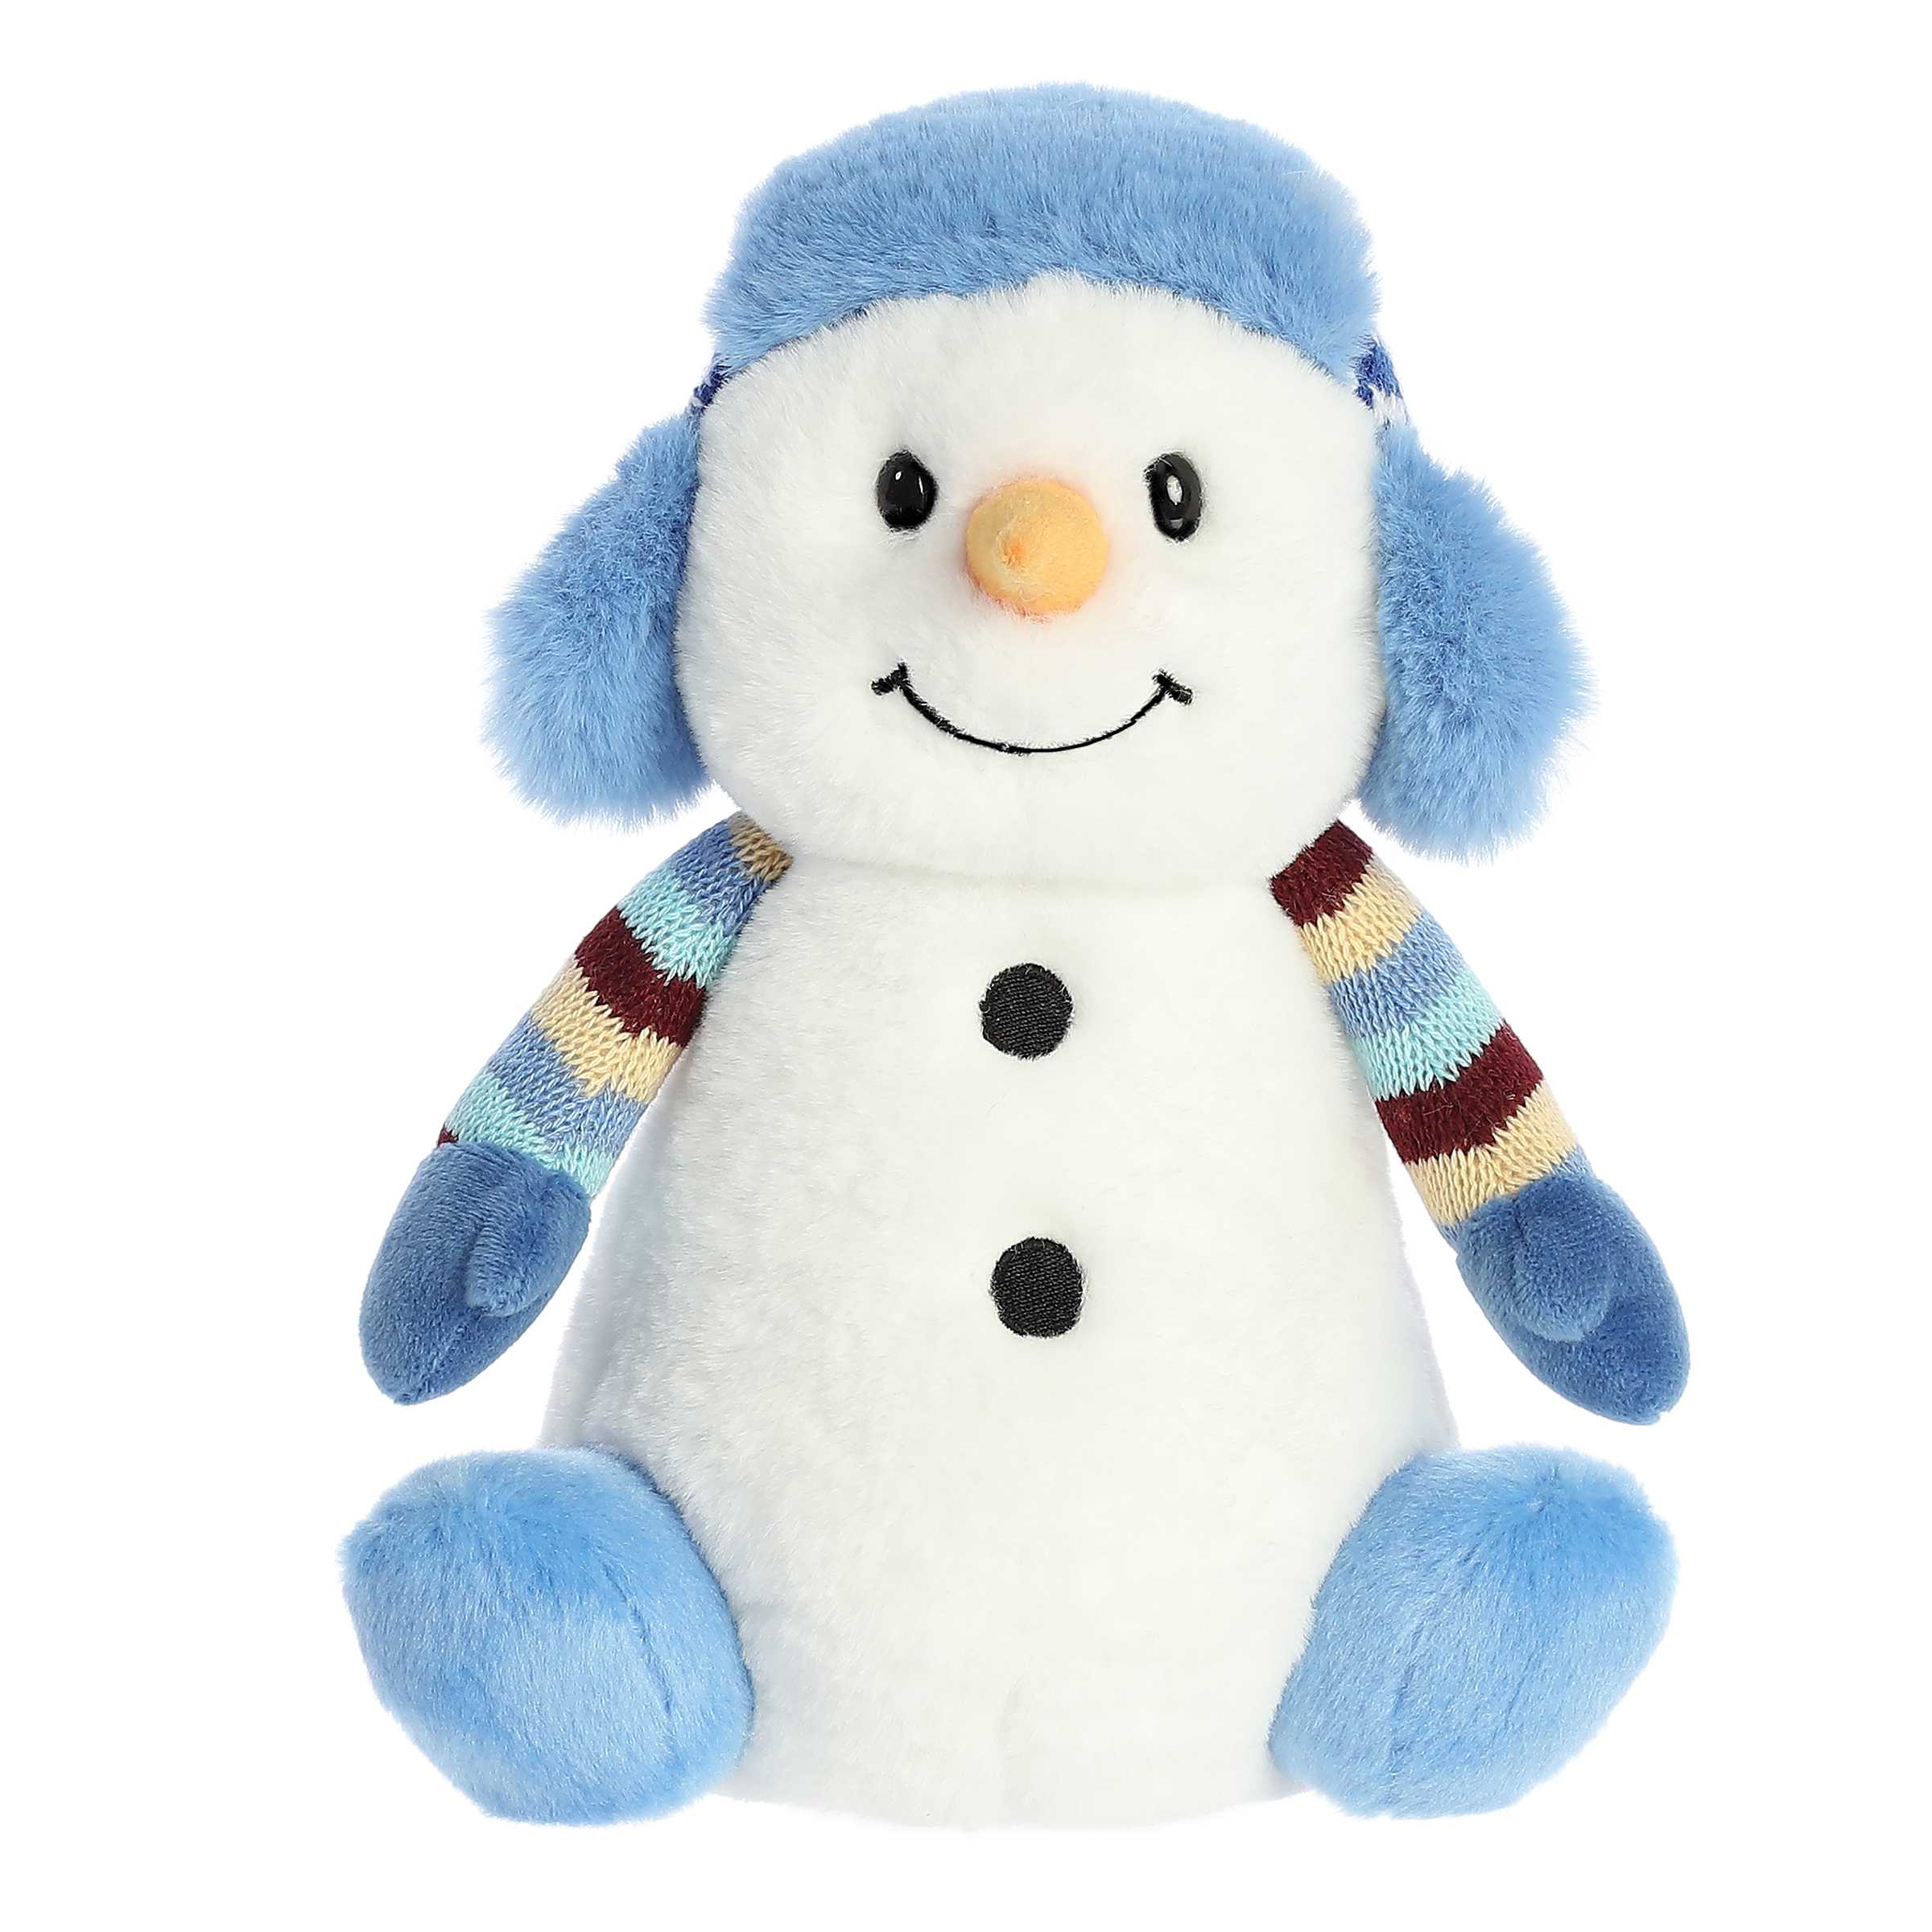 Smiling white snowman plushie with small arms and legs wearing cozy blue gloves, a carrot nose, and winter trapper hat